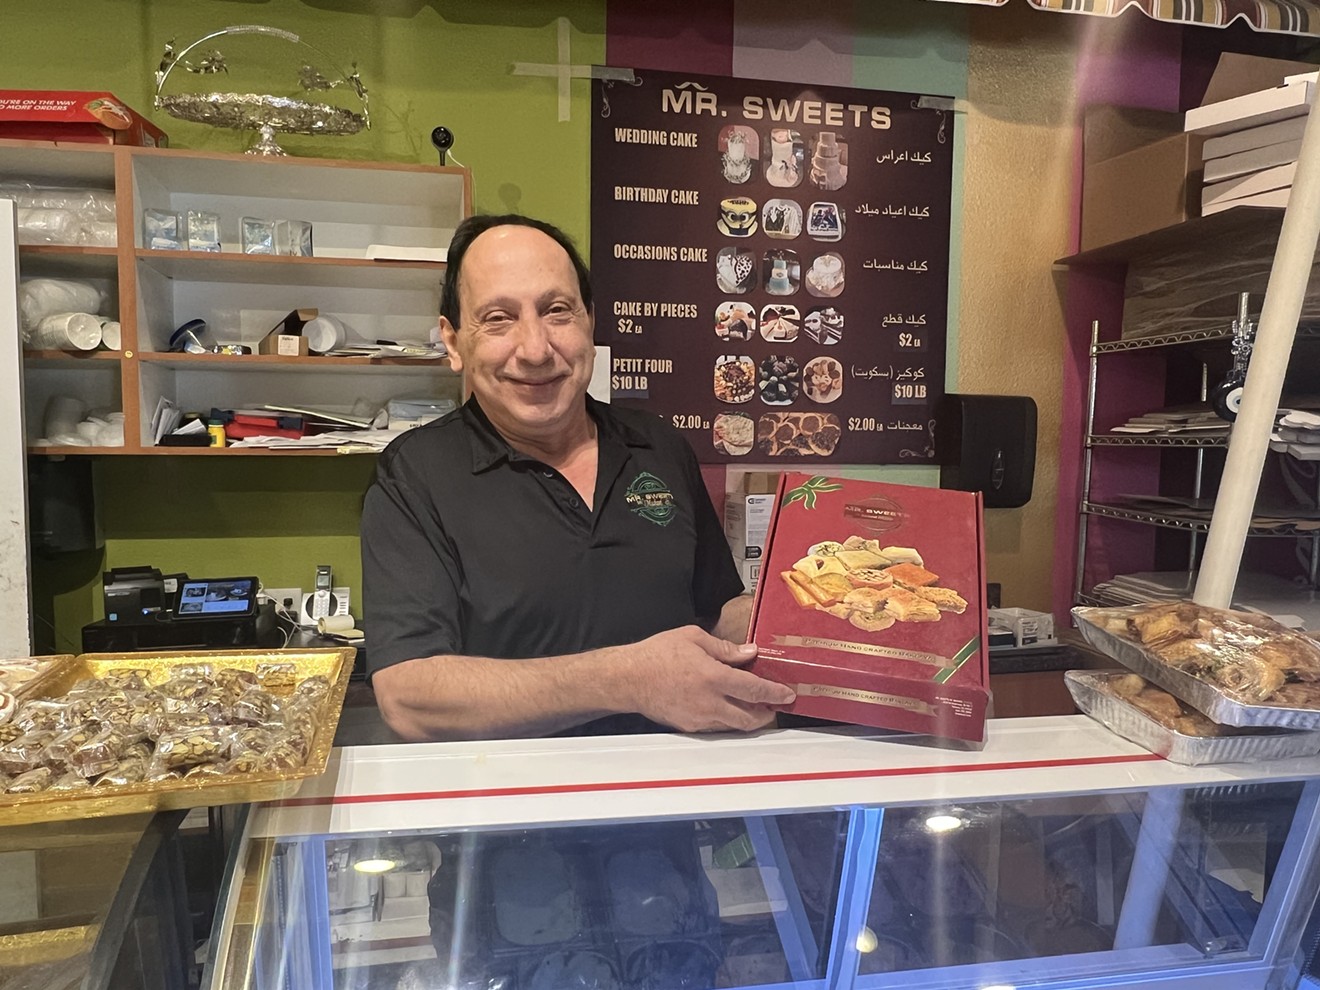 Michael Shatila, the owner of Mr. Sweets, poses with a tray of baklava.